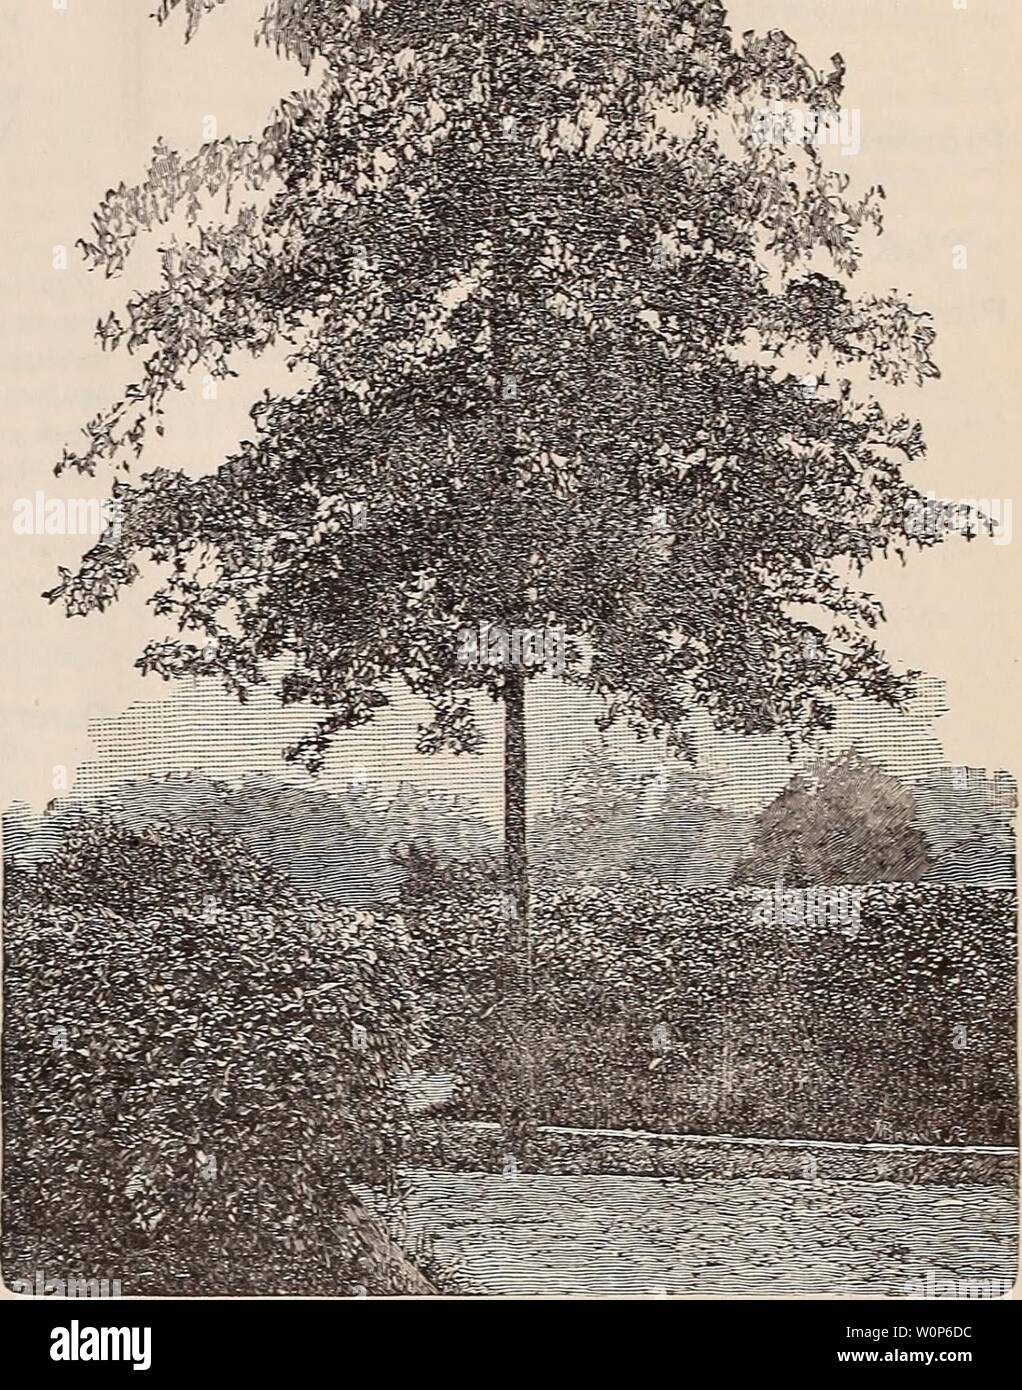 Archive image from page 17 of Descriptive catalogue of trees, shrubs,. Descriptive catalogue of trees, shrubs, vines and evergreens descriptivecatal1892thom Year: 1892  12 MEEHANS' NloRSERIES ty. It forms a large, spreading head. The leaves Quercus var. HartwiSSlana. Foliage of a-wayy are finel}' divided, and the acorns very small. Si 00 outline SI 50 (JuerCUS heterophylia. a rare native species, ' var. Louetta. The leaves are long andlanceo- with much divided leaves SI 50 , late. A beautiful variety SI 50 ' imbricaria, Laurel Oak. A beautiful kind, ; ' var. pectinata. Foliage finely divided.. Stock Photo